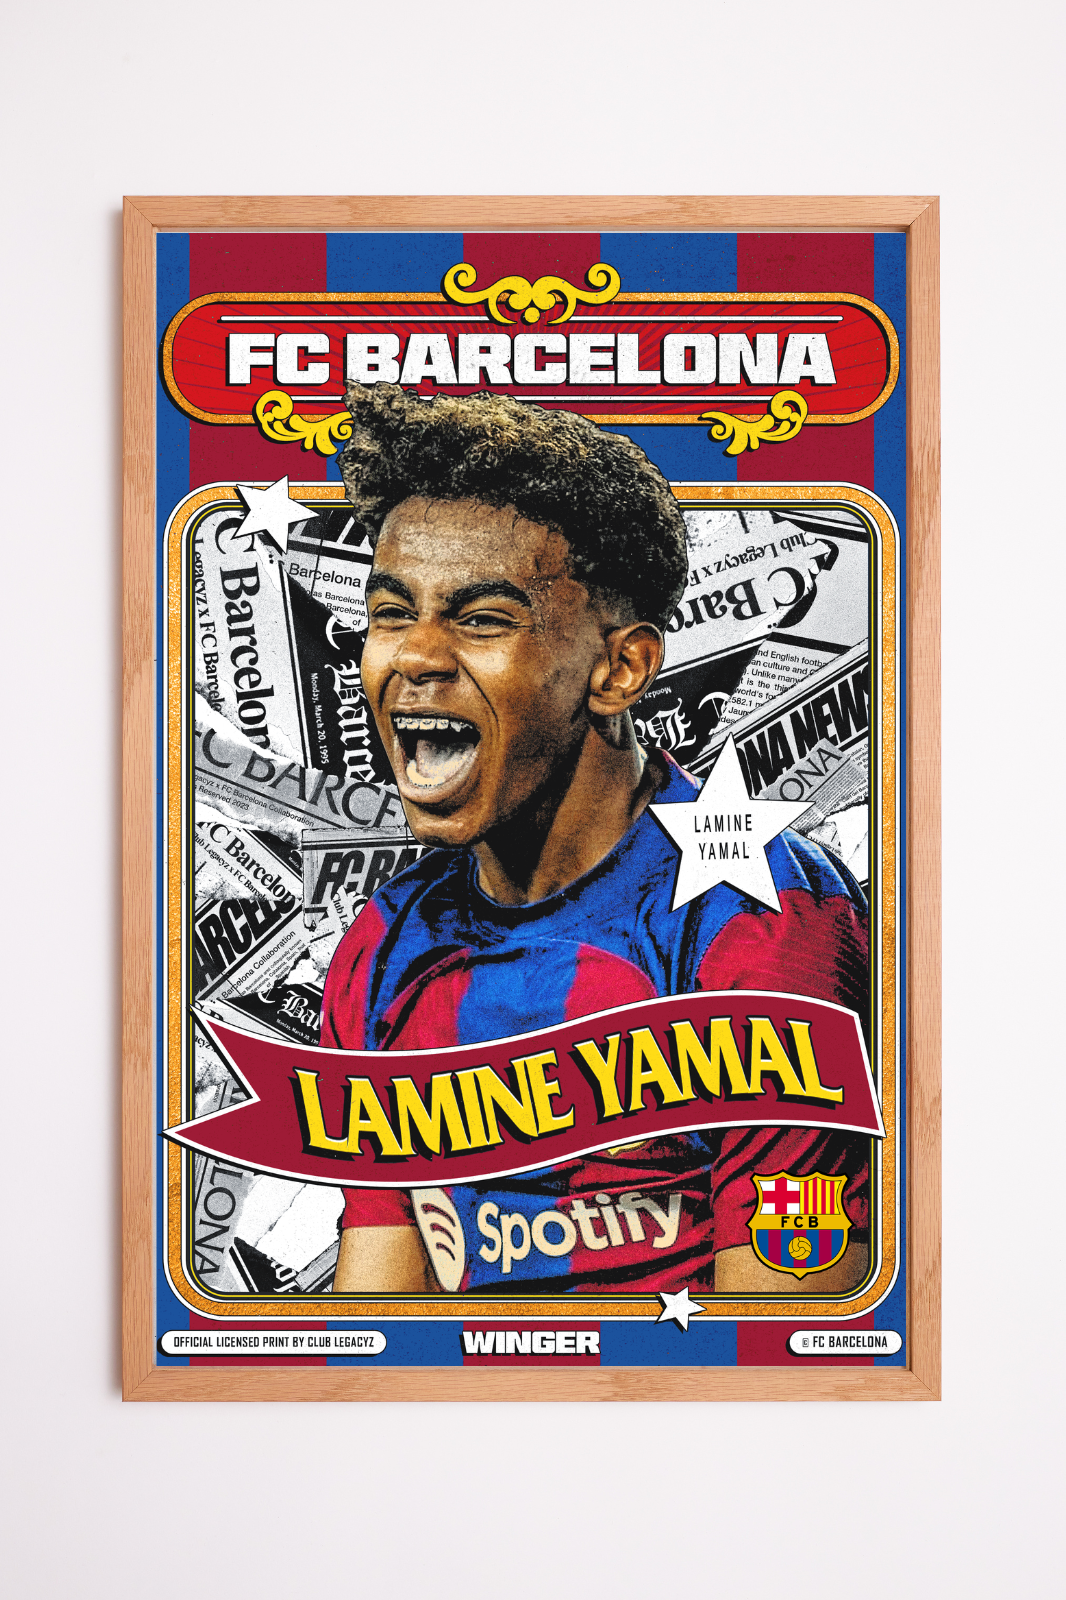 FC Barcelona - Lamine Yamal Retro poster limited to 100